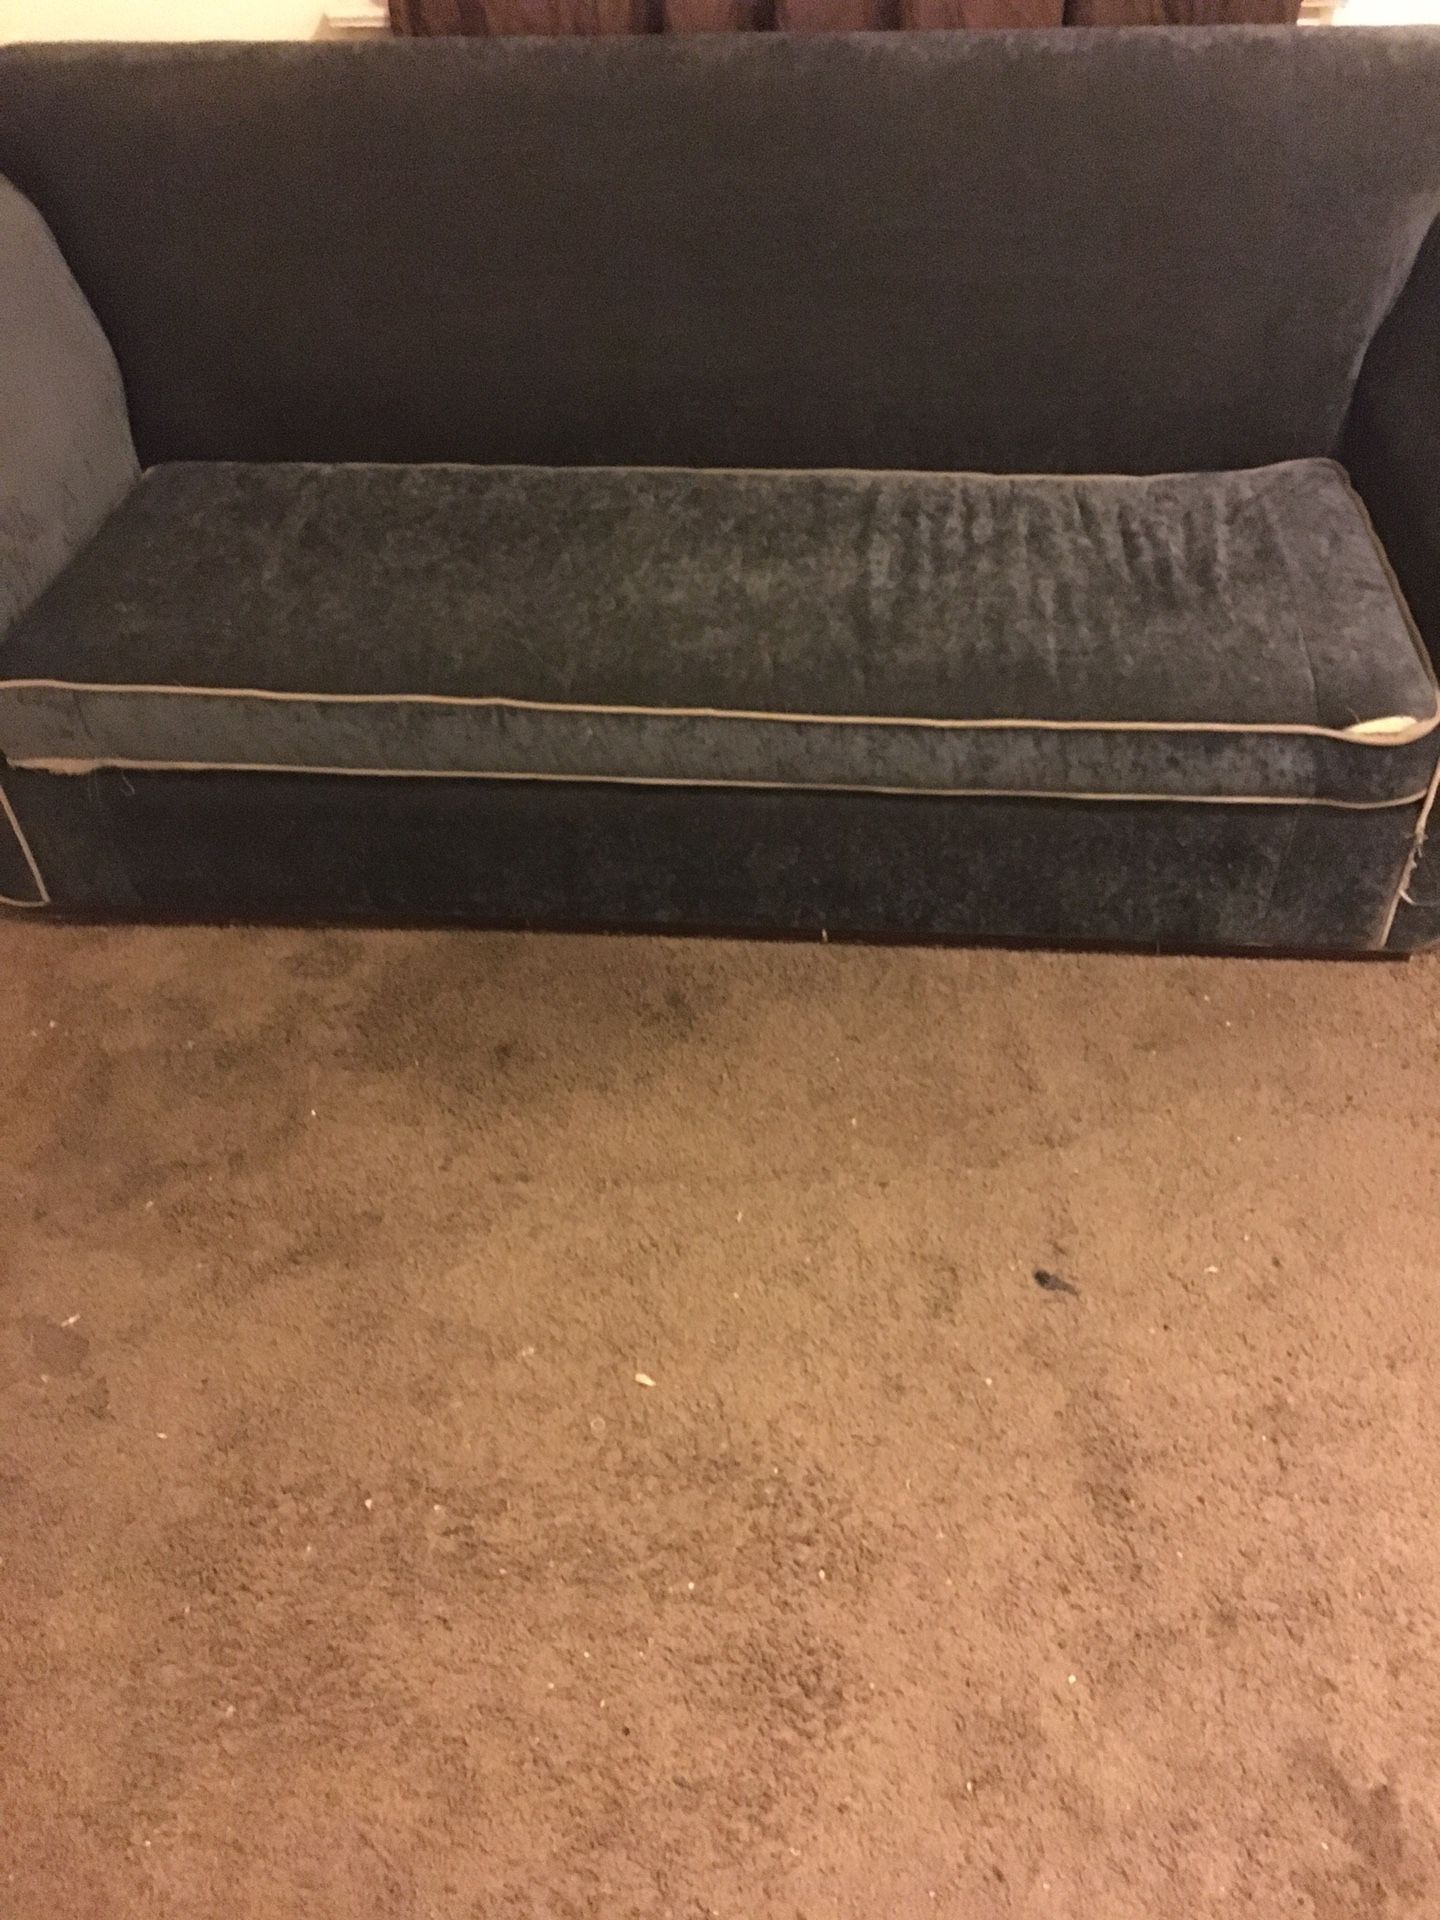 It is in good condition and it is a bed couch futon